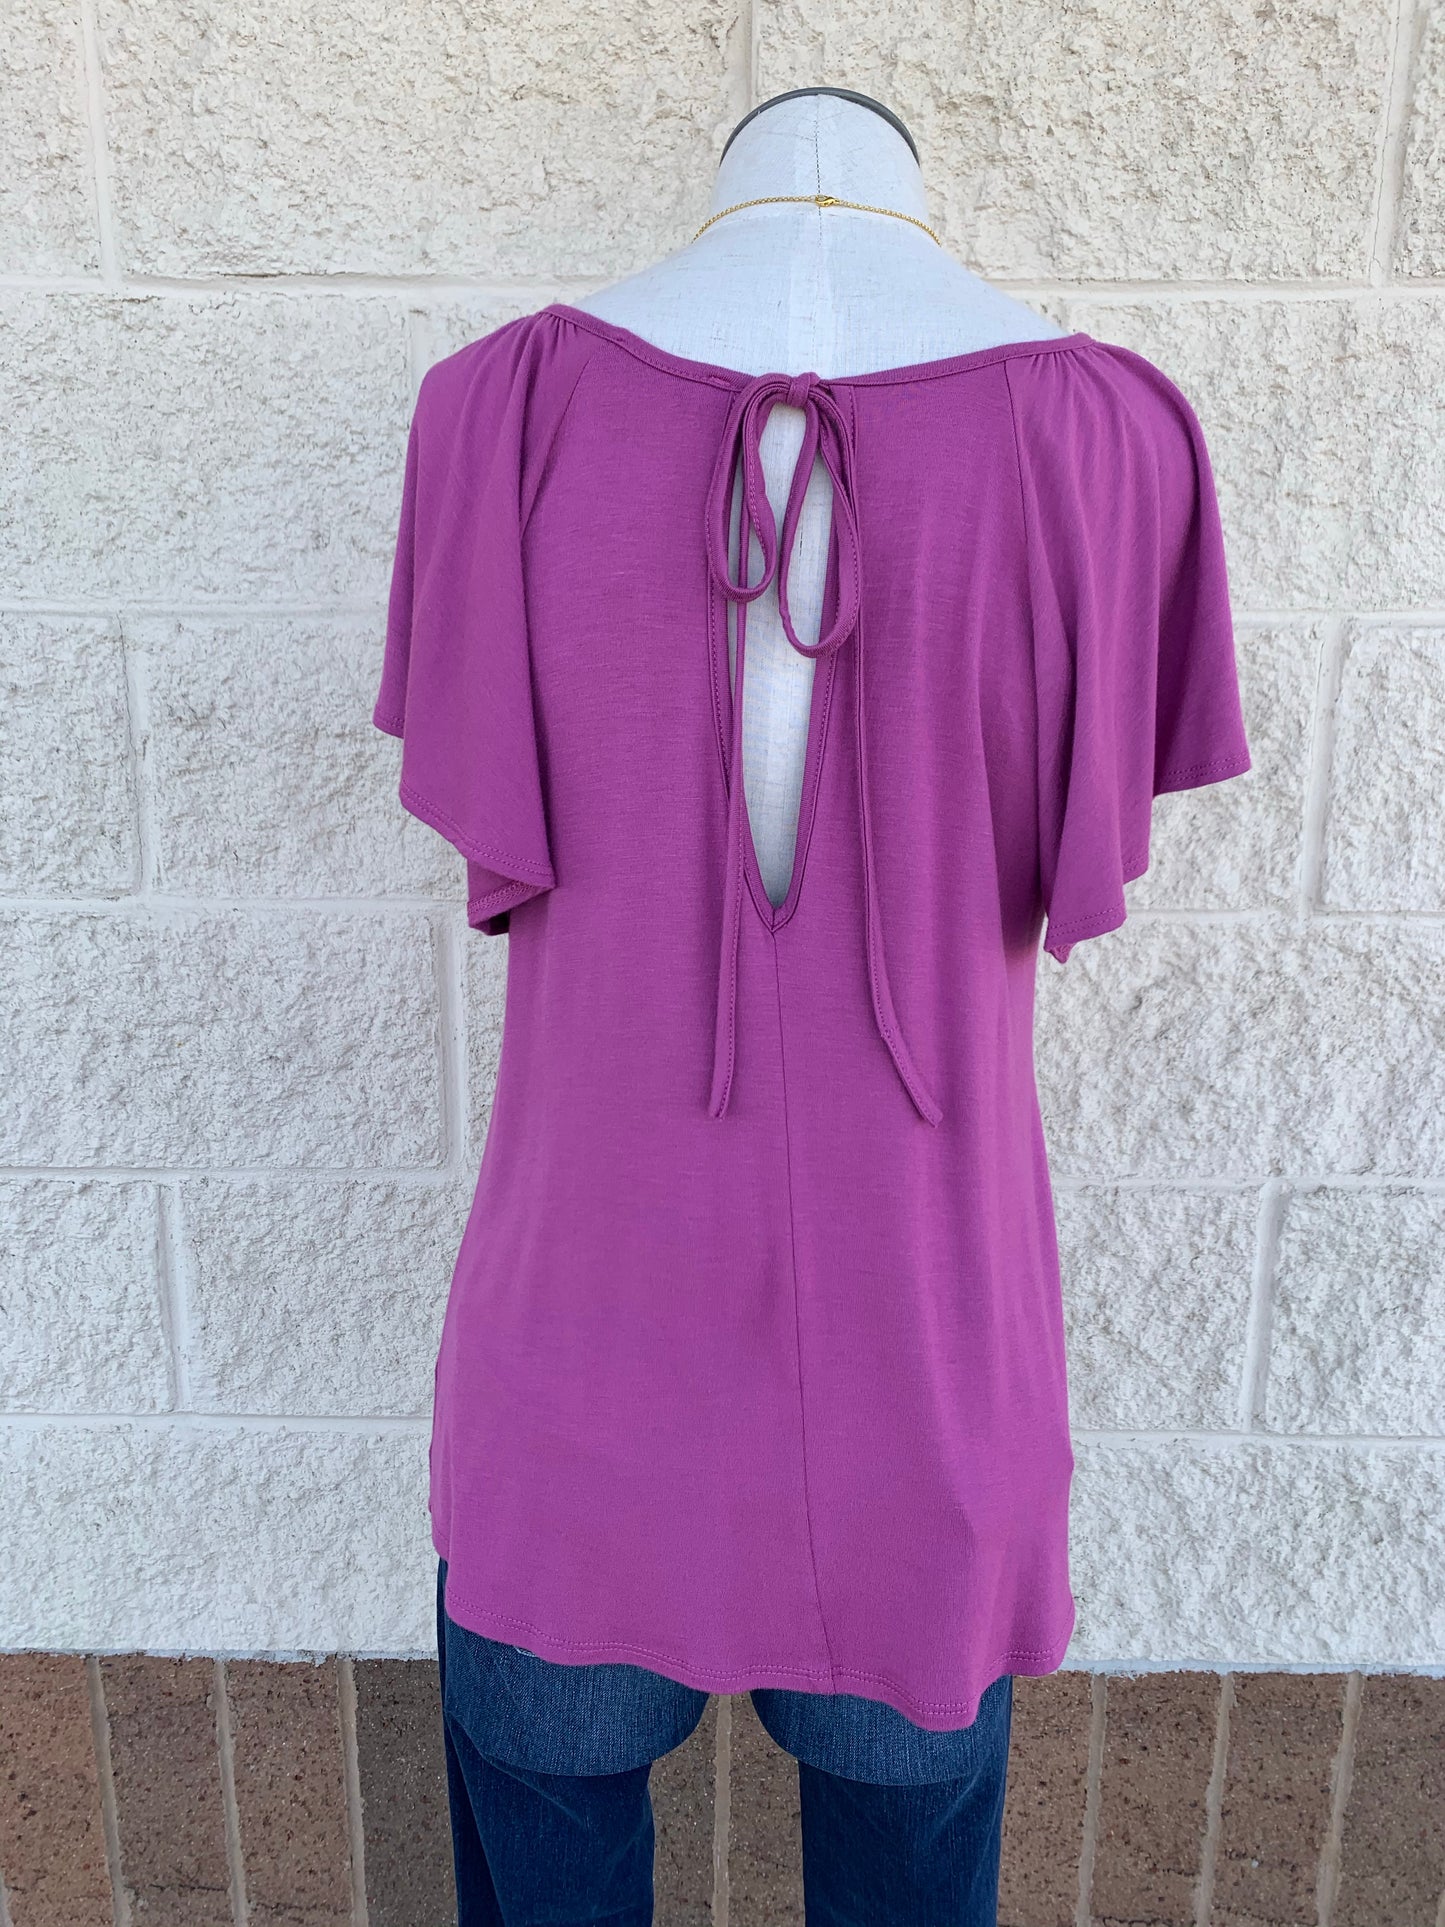 Short Sleeve Knit Top w/ cut out shoulders & back